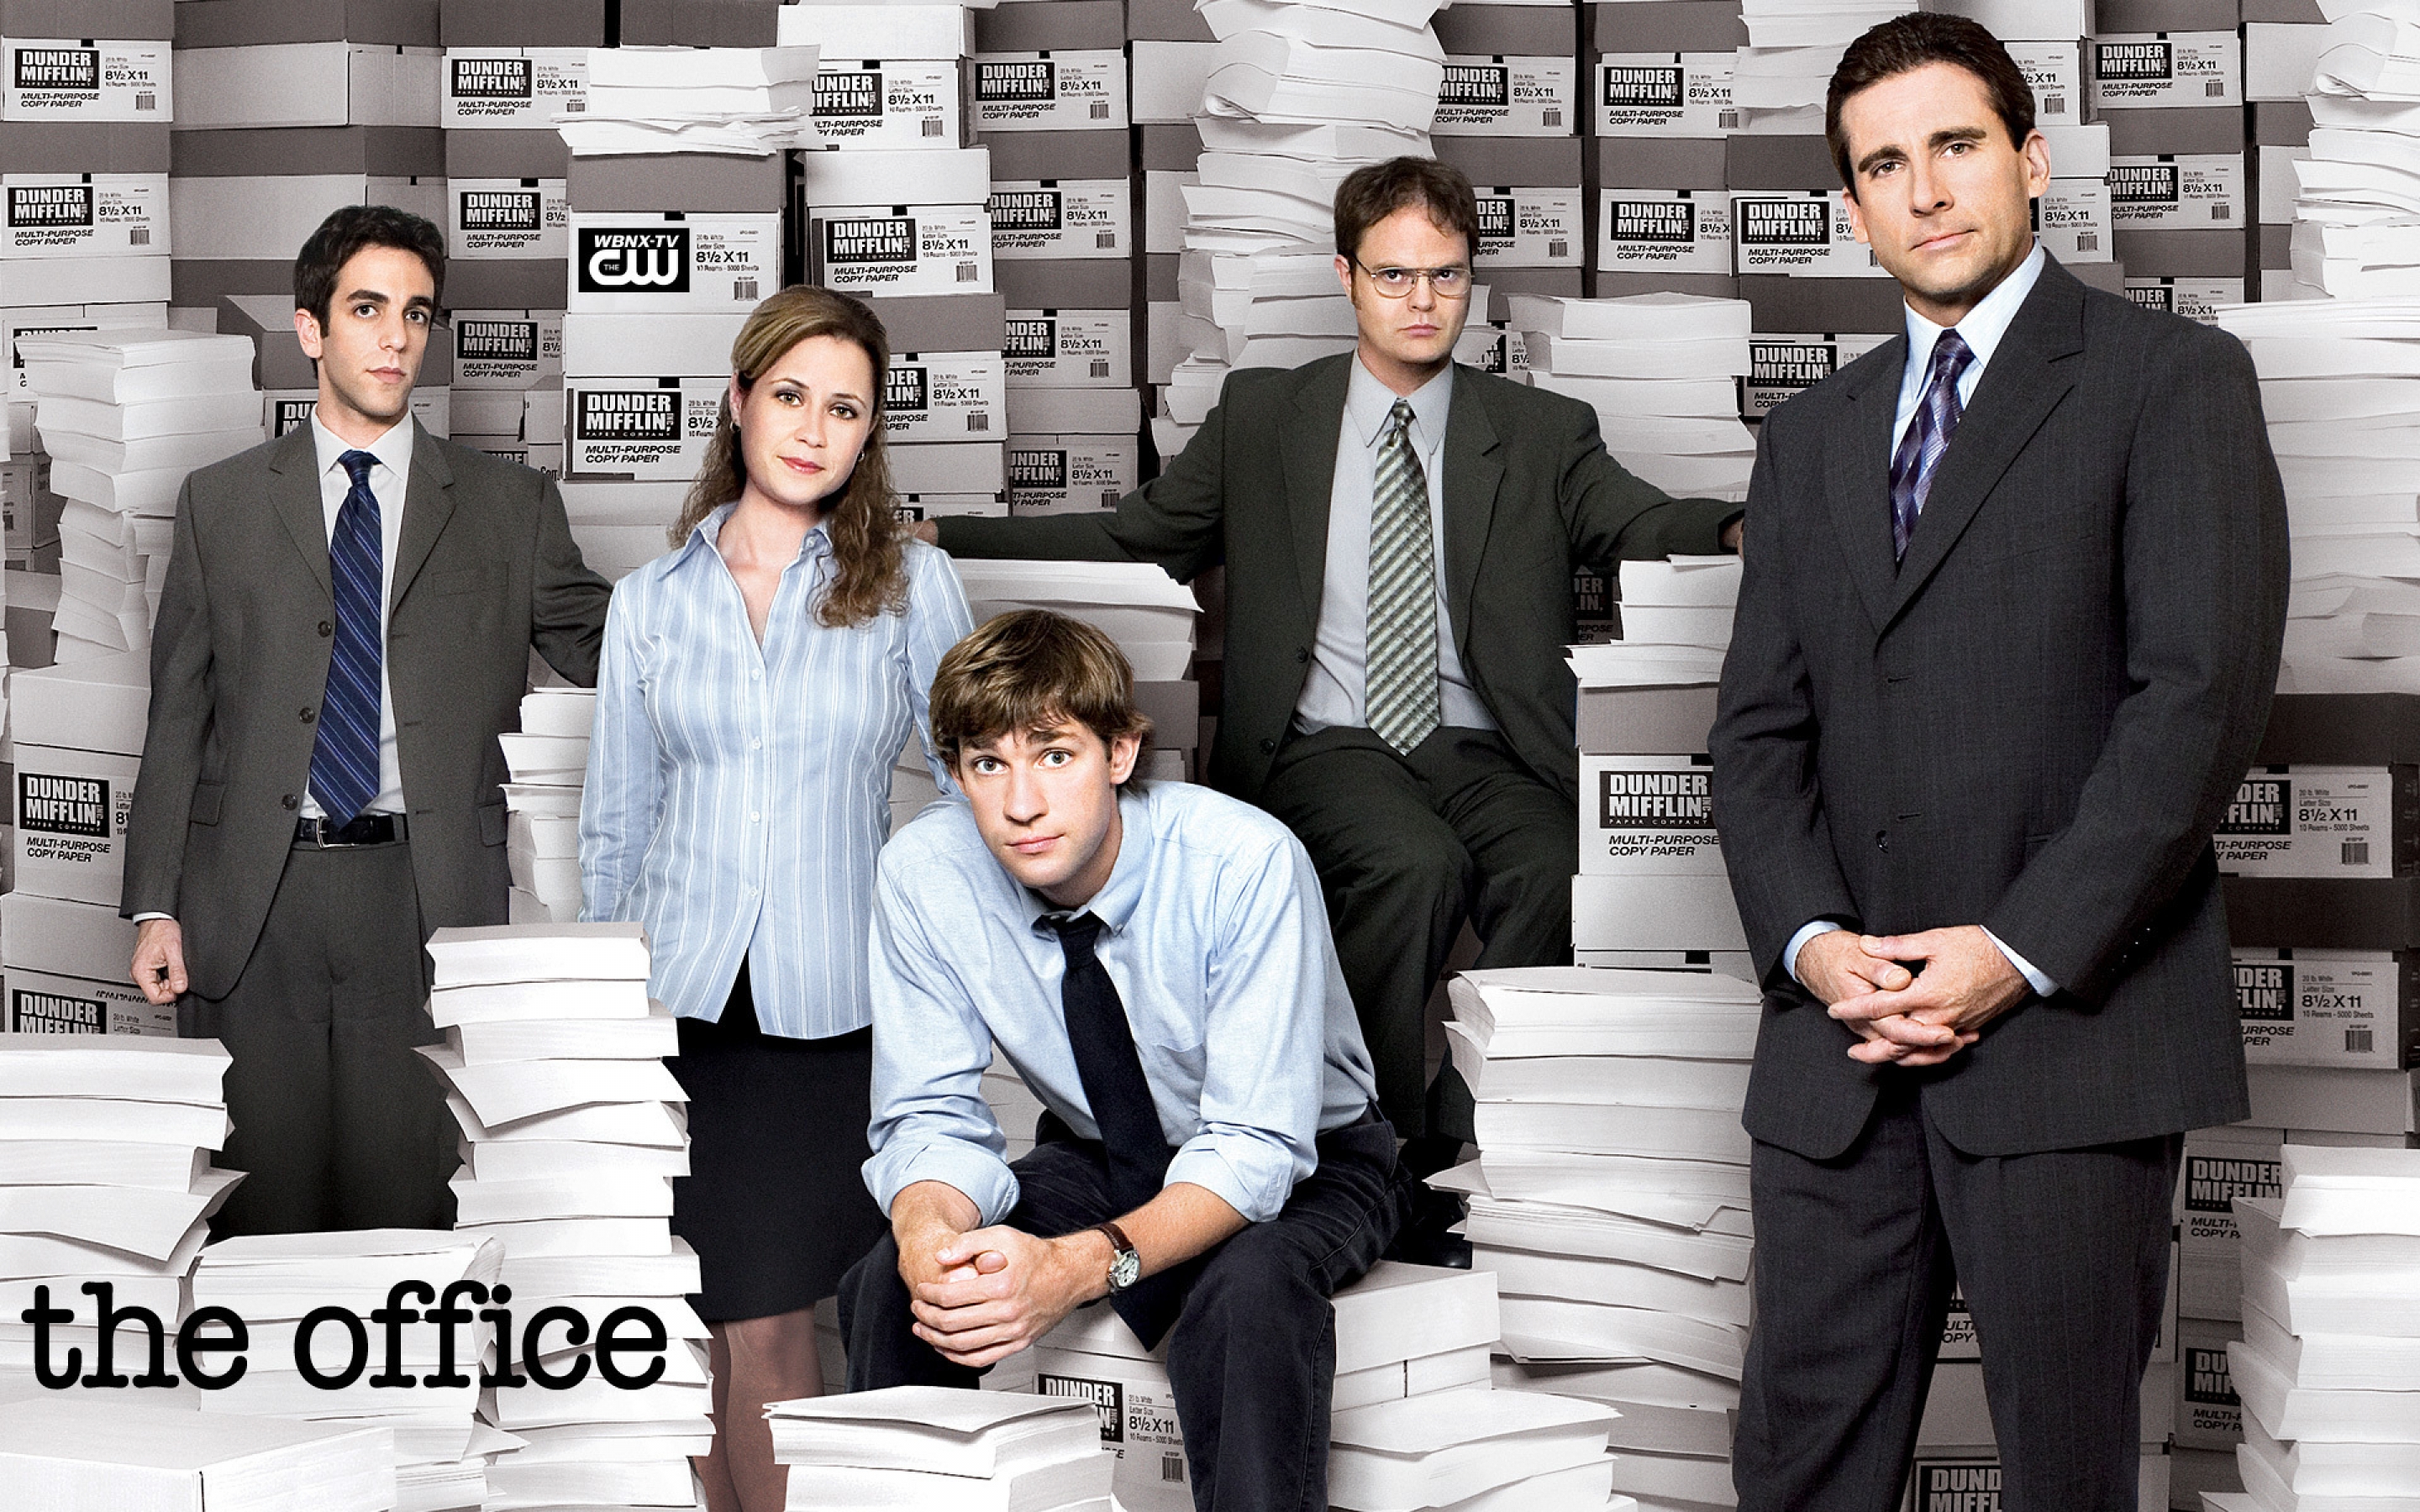 The Office Wallpaper Pictures Image